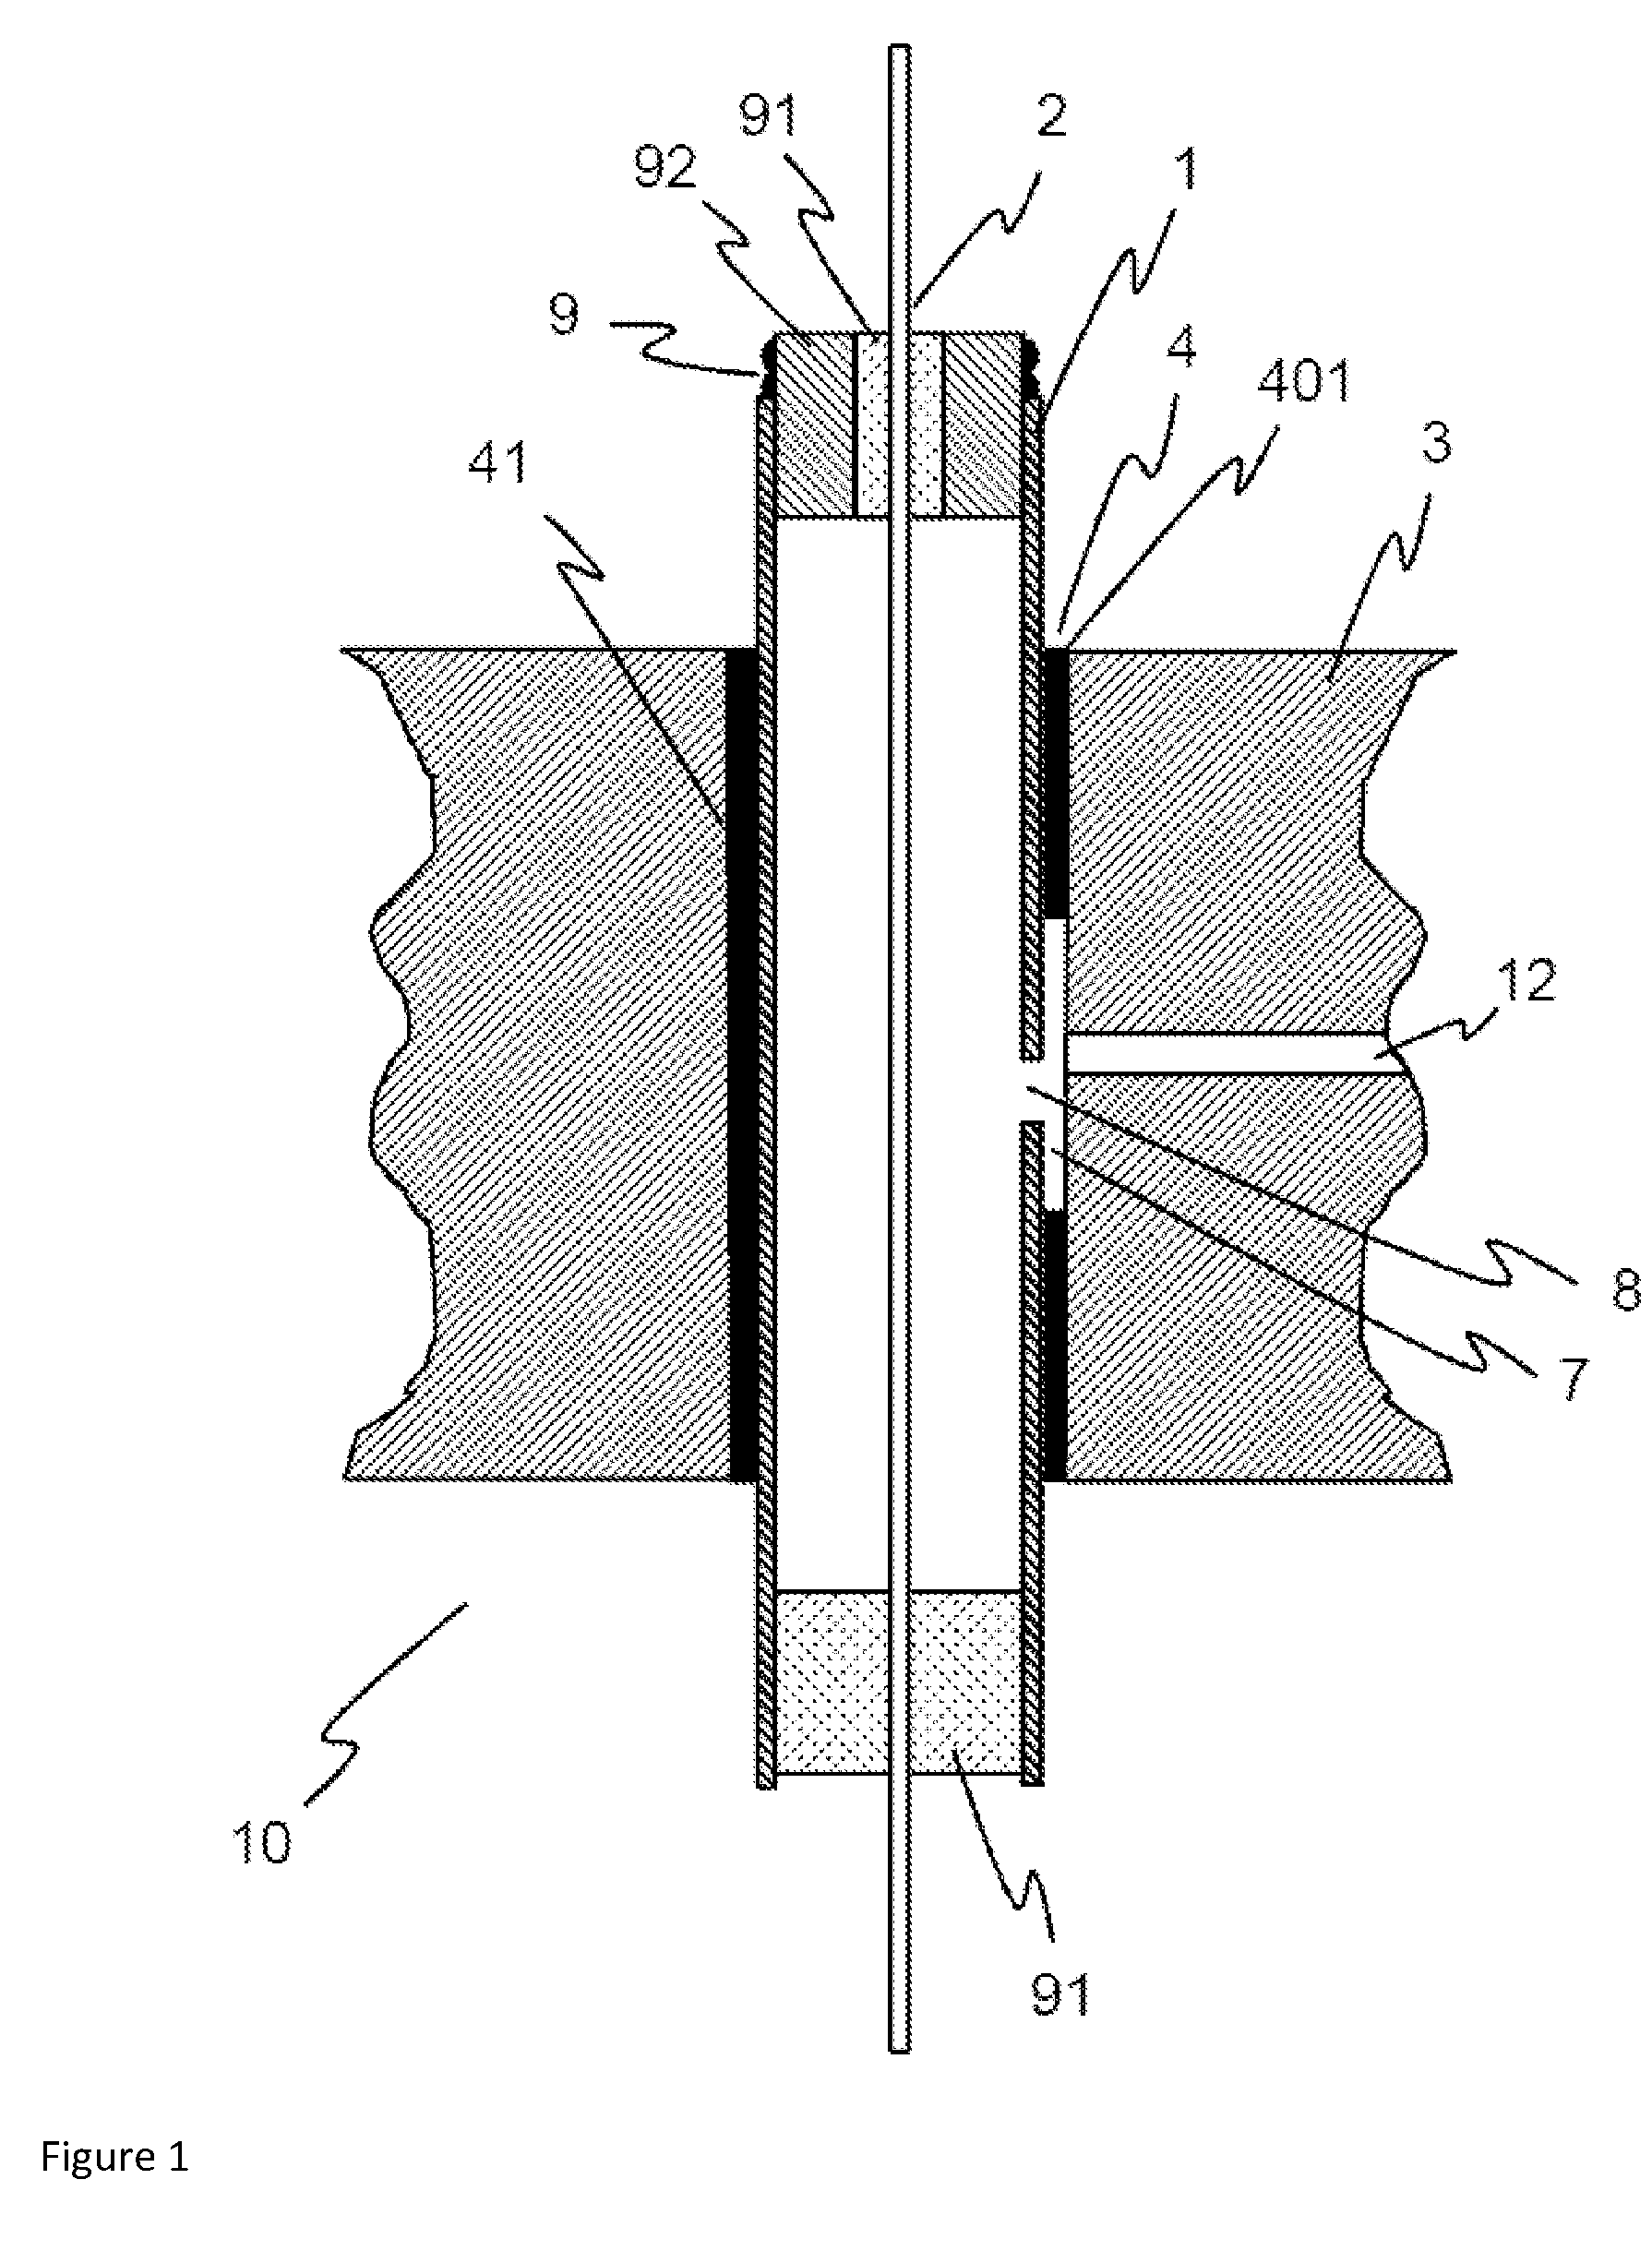 Fault-proof feed-through device